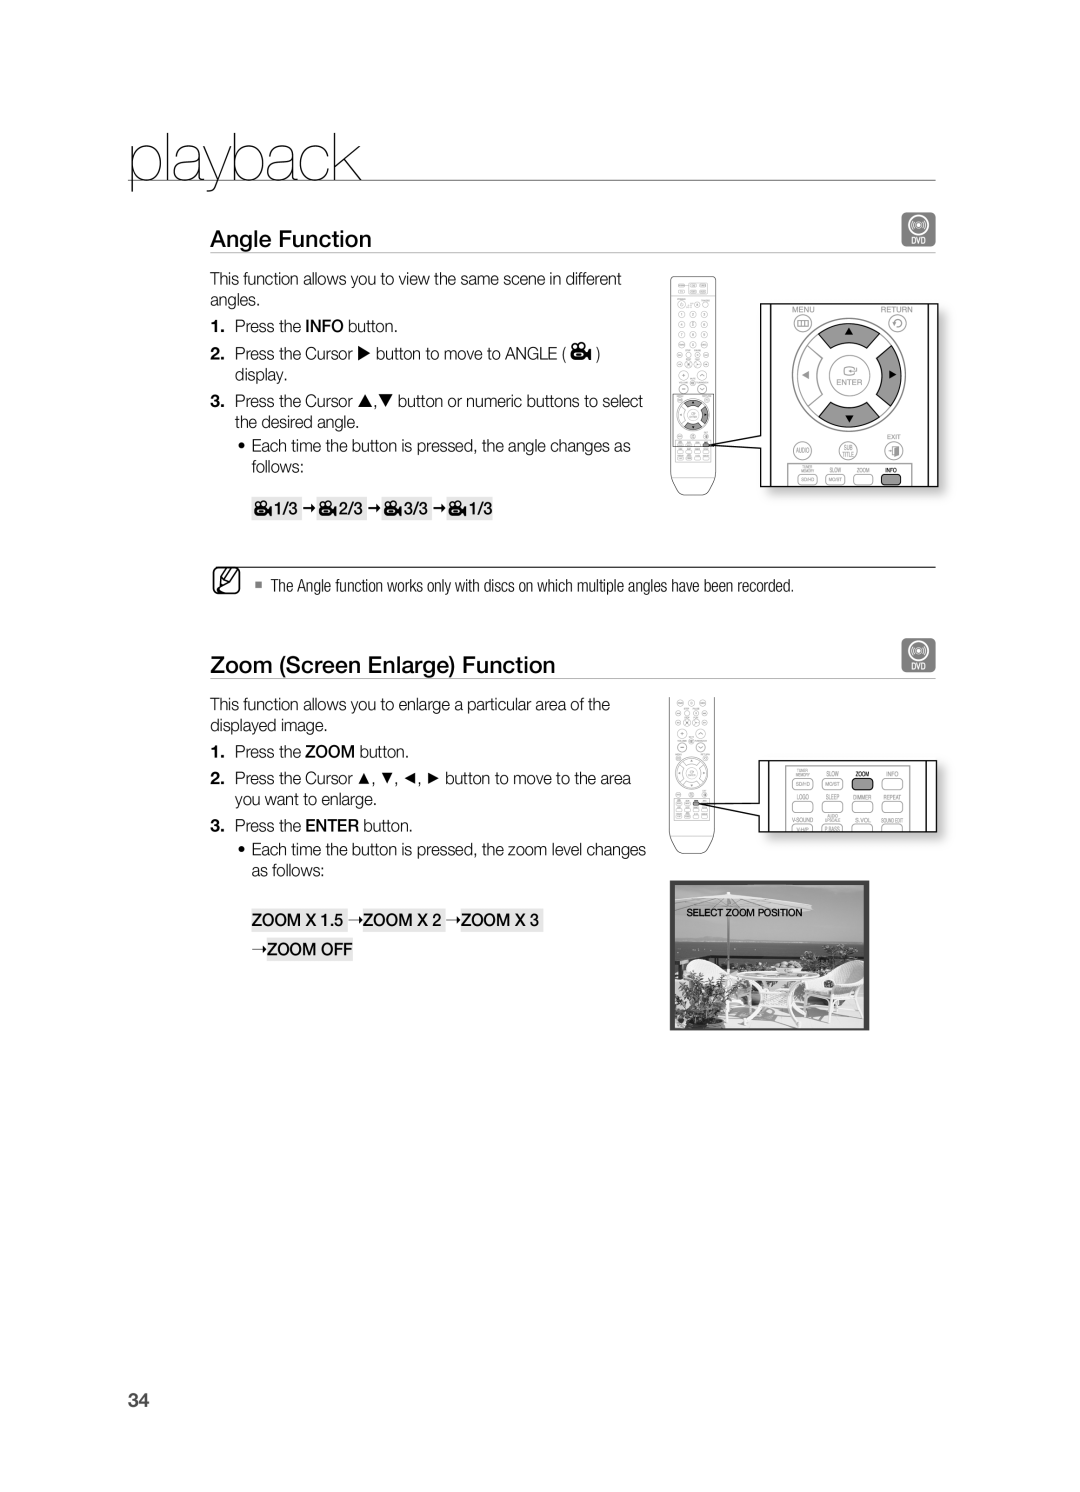 Samsung HT-X710 user manual Angle Function, Zoom Screen Enlarge Function, playback 